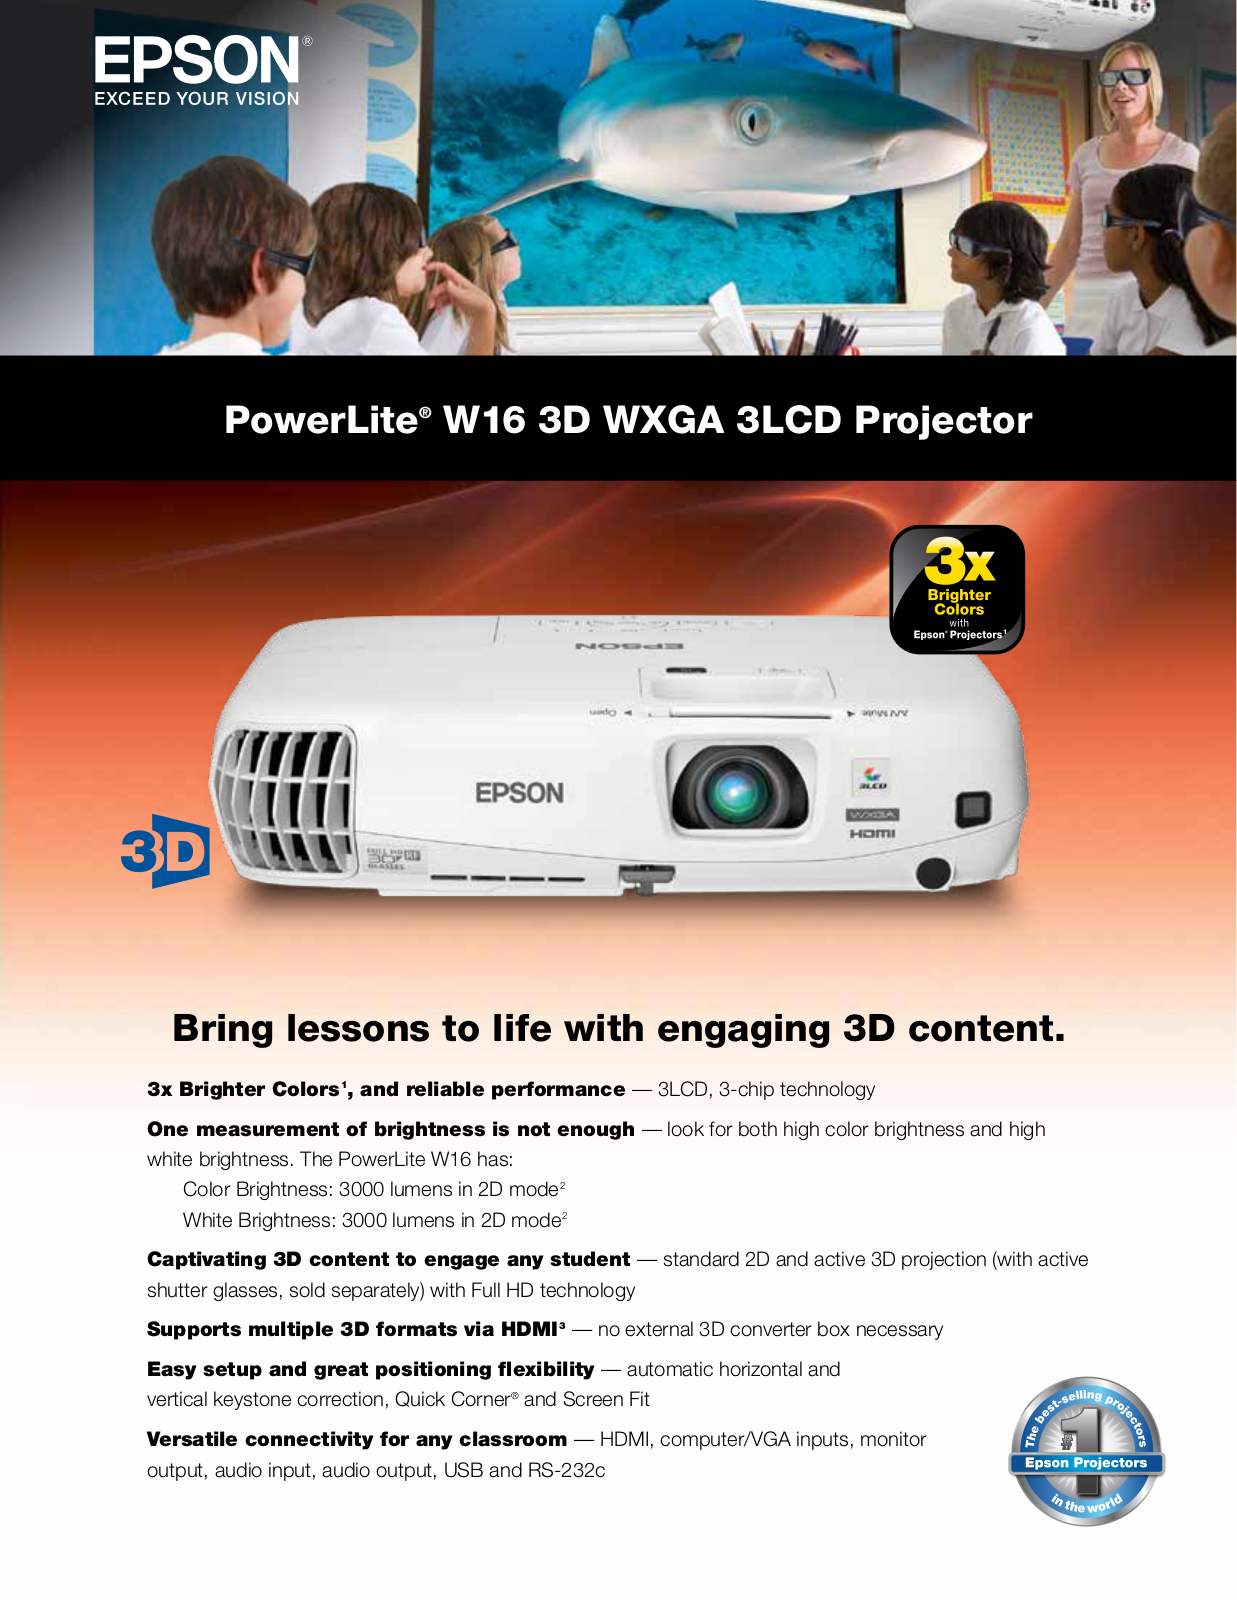 Epson PowerLite W16 3D Product Specifications